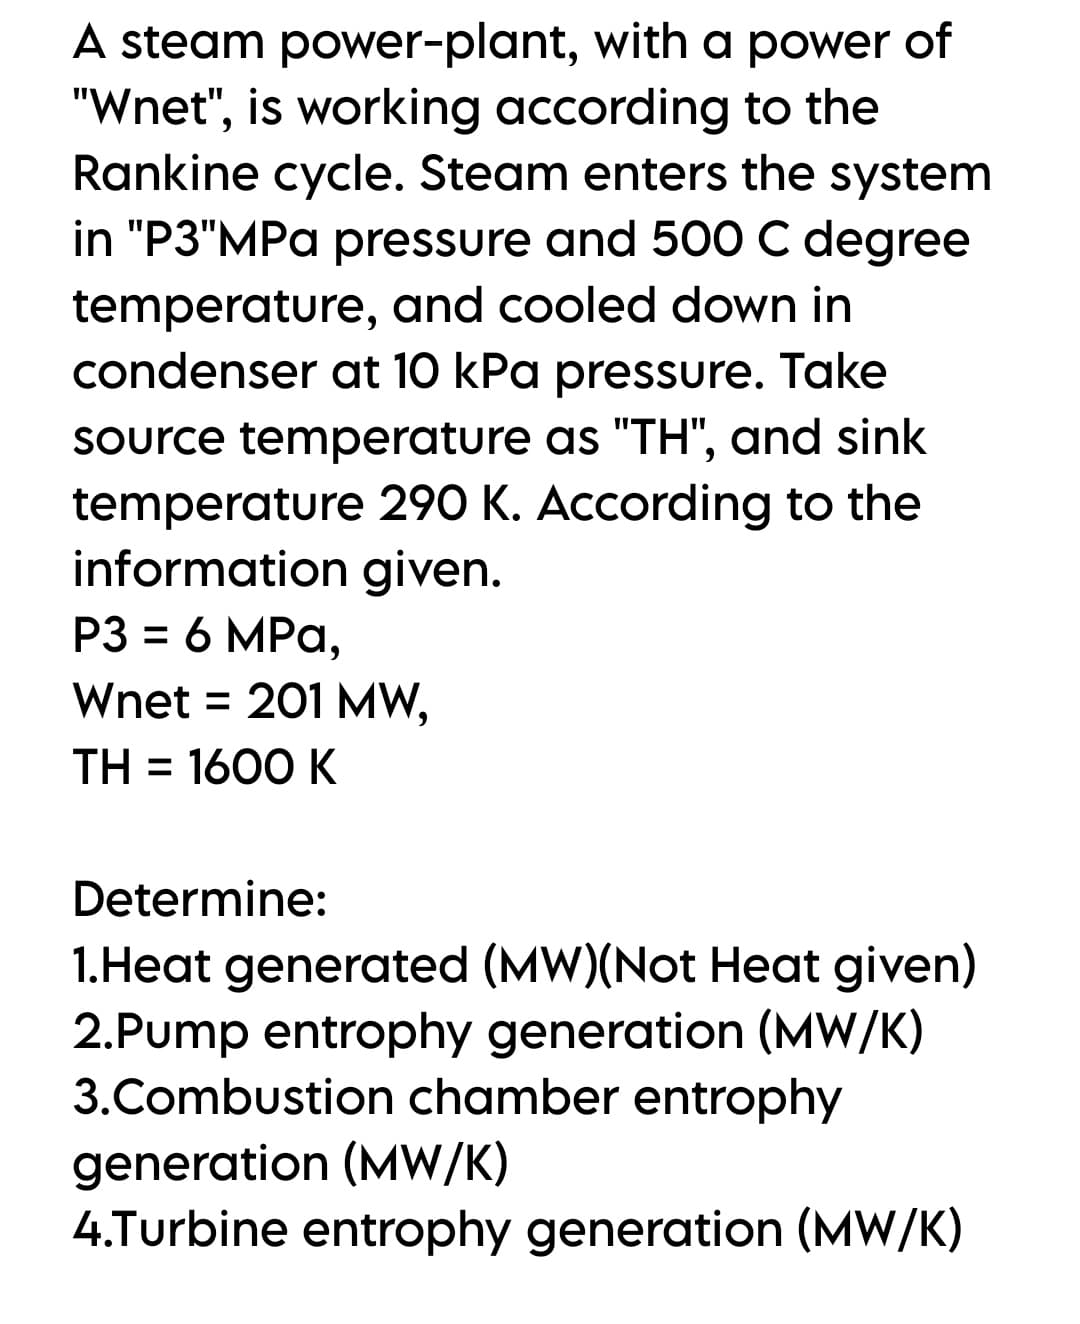 A steam power-plant, with a power of
"Wnet", is working according to the
Rankine cycle. Steam enters the system
in "P3"MPa pressure and 500 C degree
temperature, and cooled down in
condenser at 10 kPa pressure. Take
Source temperature as "TH", and sink
temperature 290 K. According to the
information given.
P3 = 6 MPa,
%3D
Wnet = 201 MW,
TH = 1600 K
Determine:
1.Heat generated (MW)(Not Heat given)
2.Pump entrophy generation (MW/K)
3.Combustion chamber entrophy
generation (MW/K)
4.Turbine entrophy generation (MW/K)
